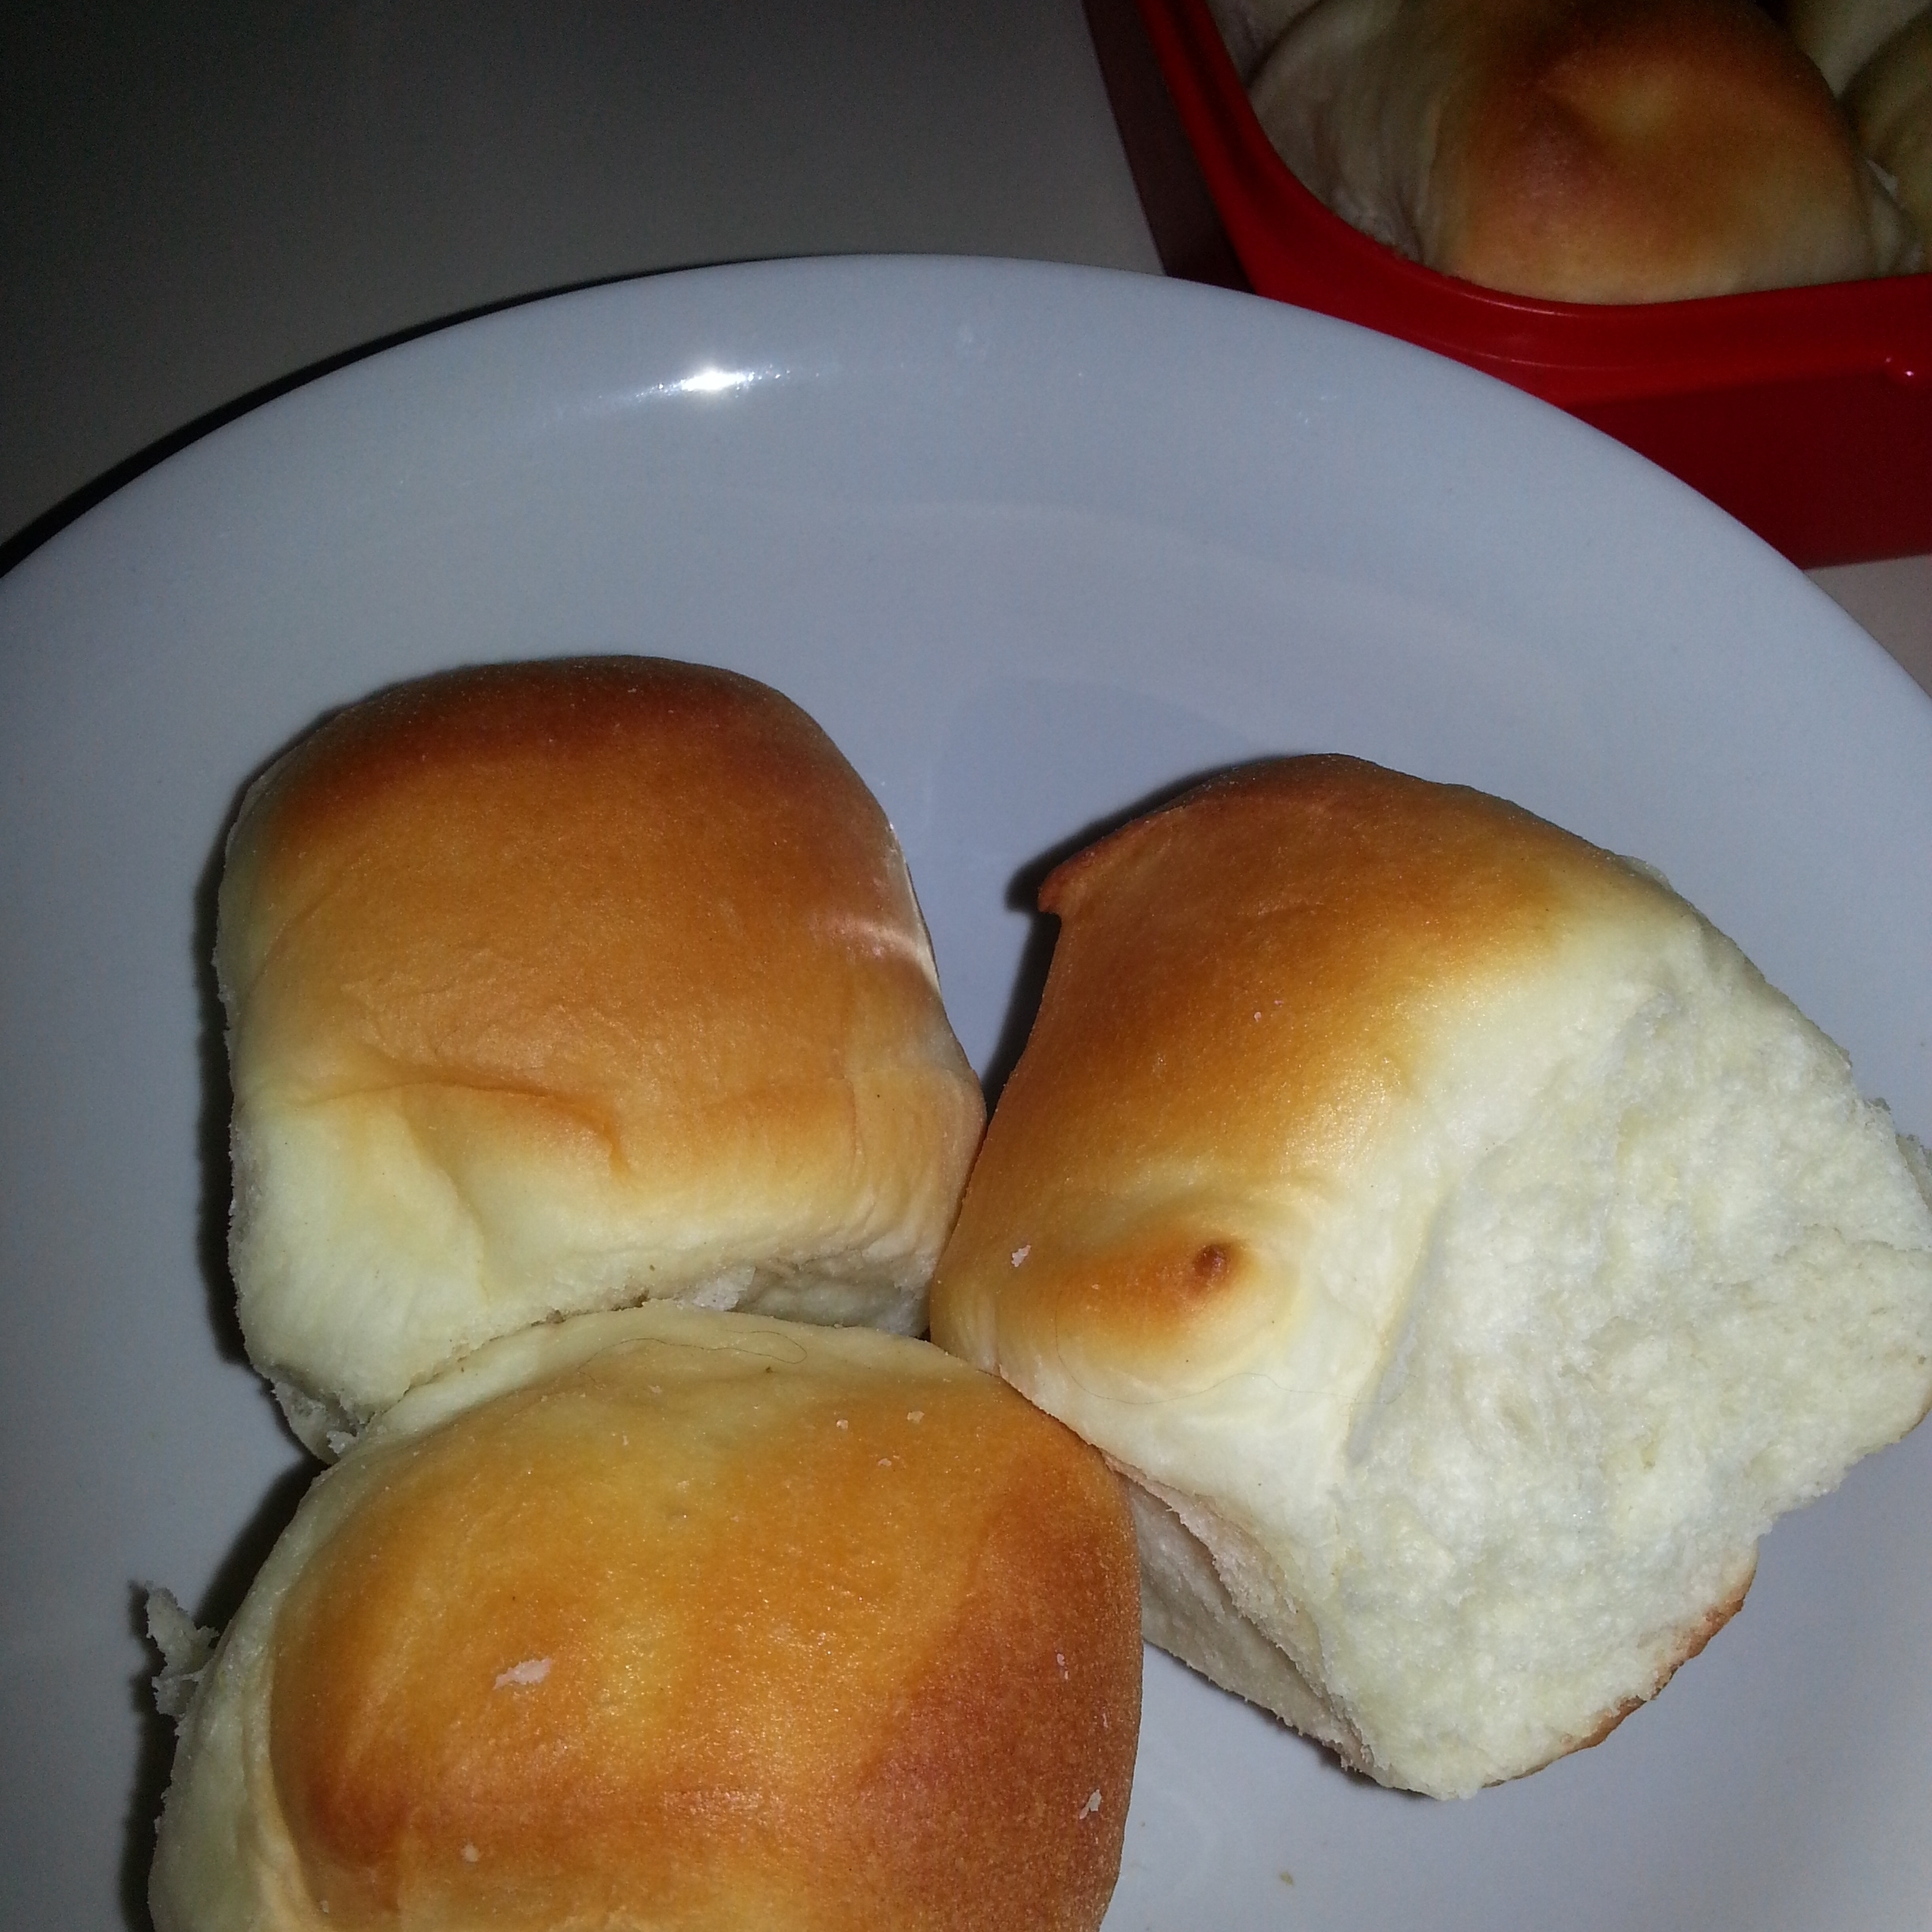 The best yeast rolls, proofed in your bread machine Recipe - (4.3/5)